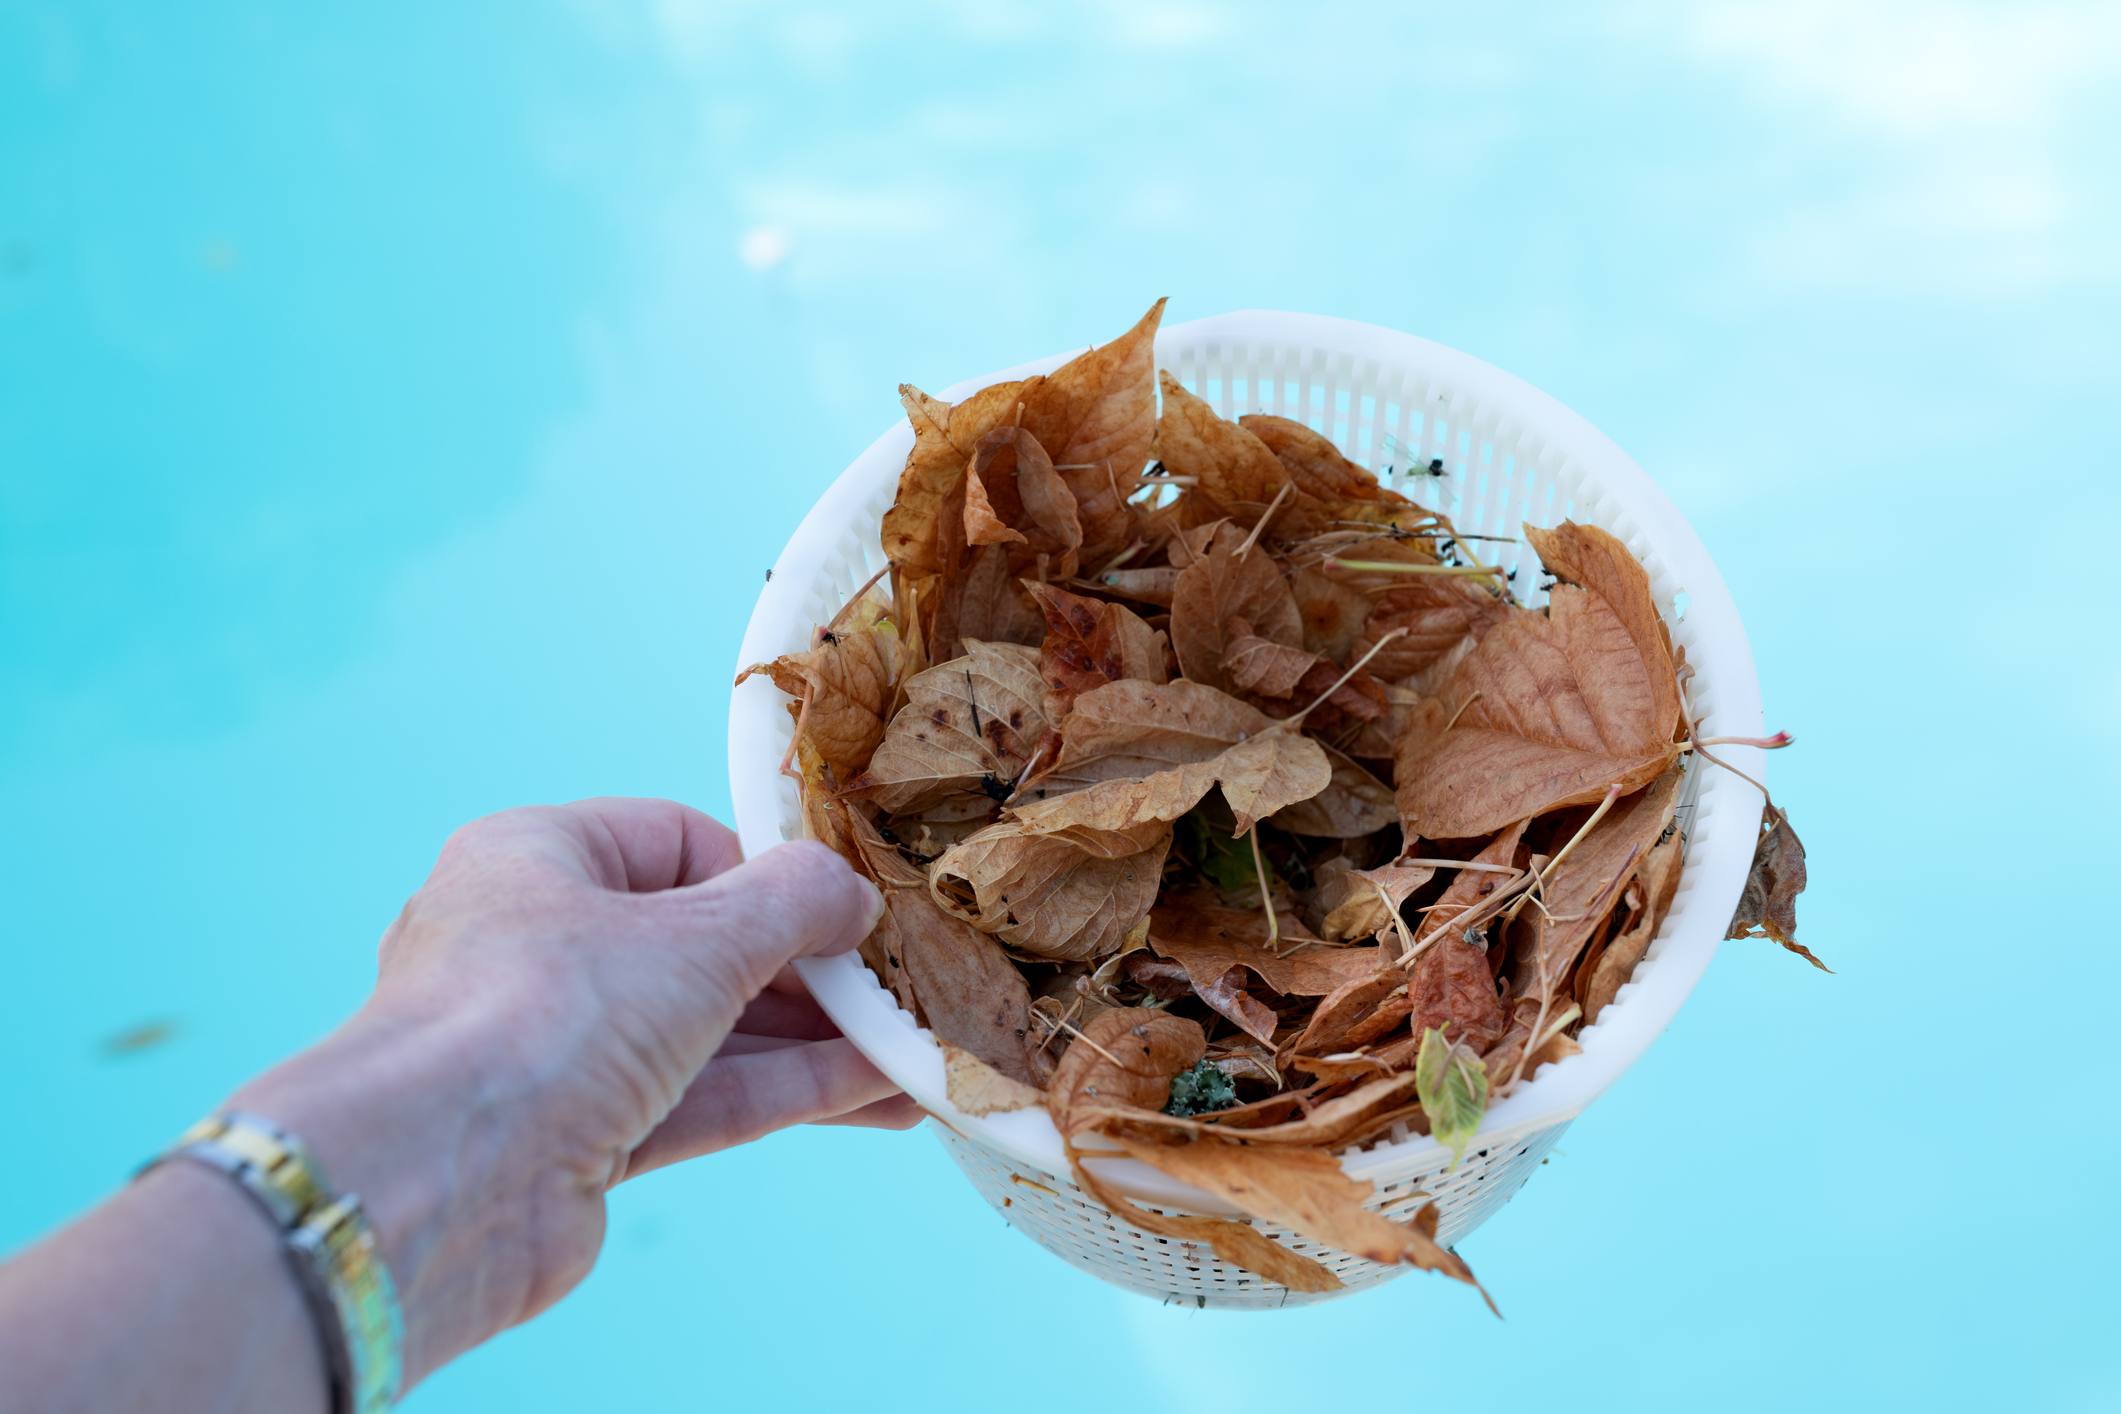 A hand is holding a pool skimmer basket full of leaves over pool water.